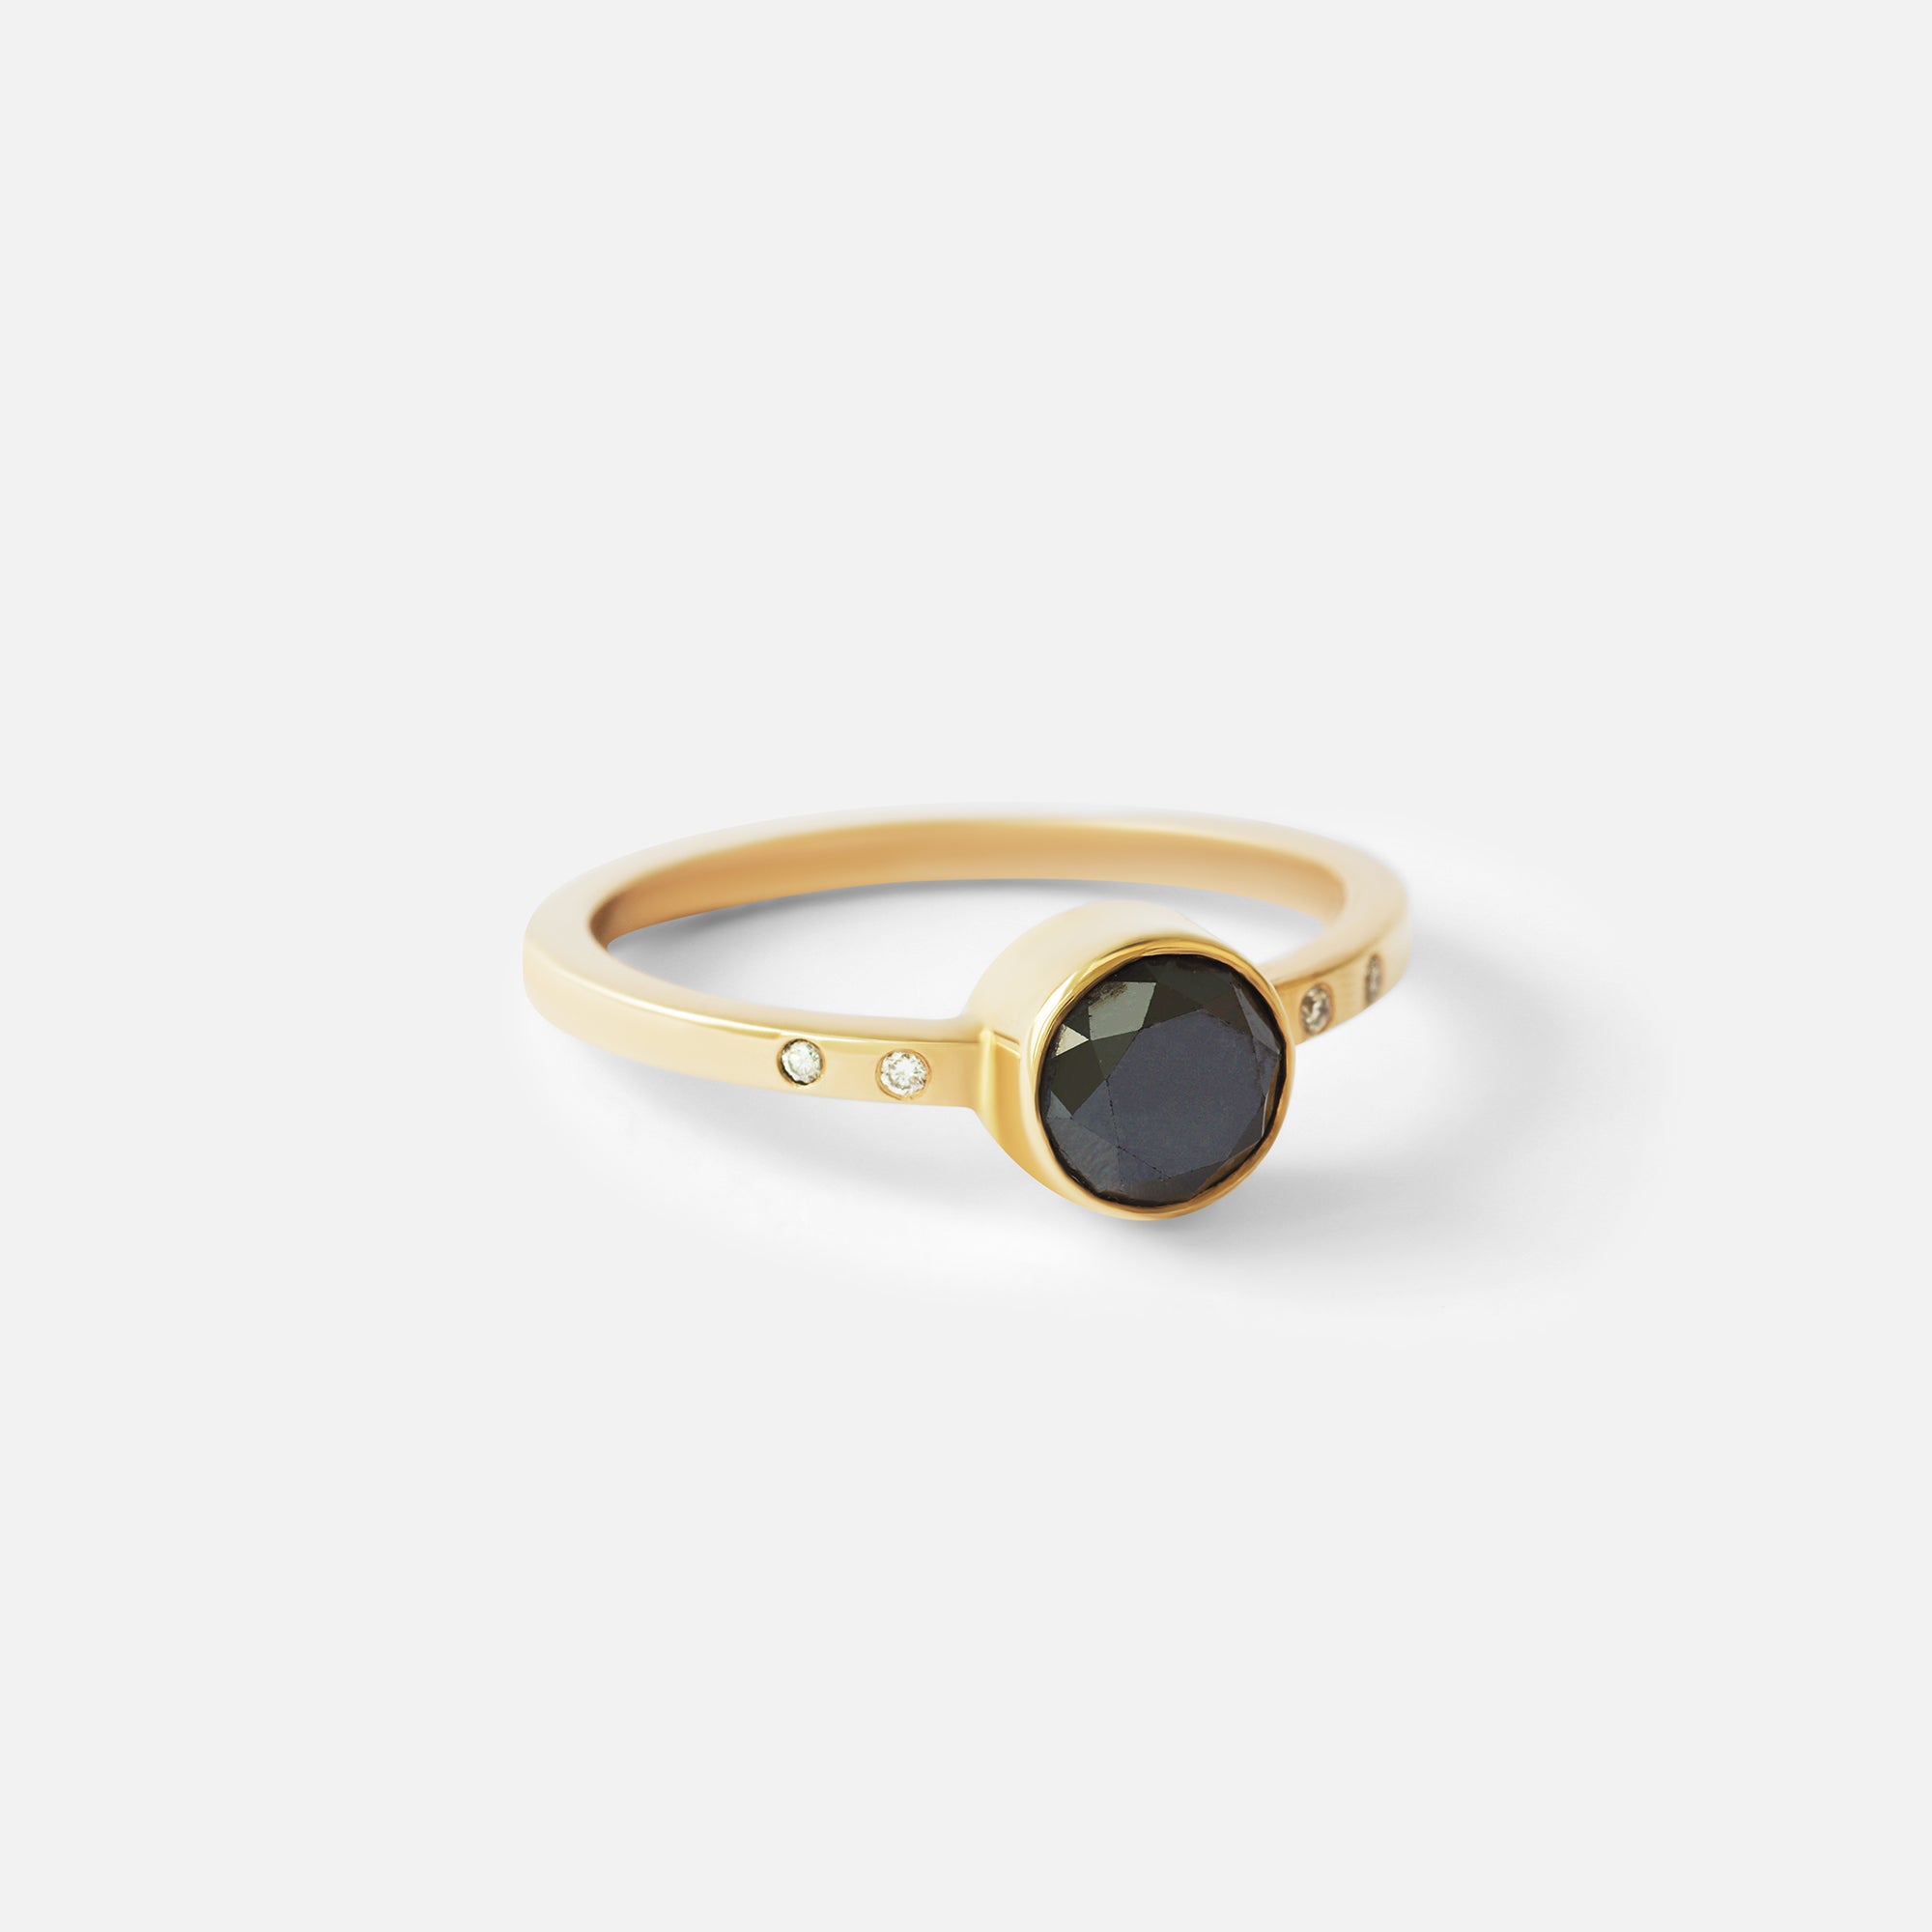 Black Diamond / Ring By Nishi in Engagement Rings Category